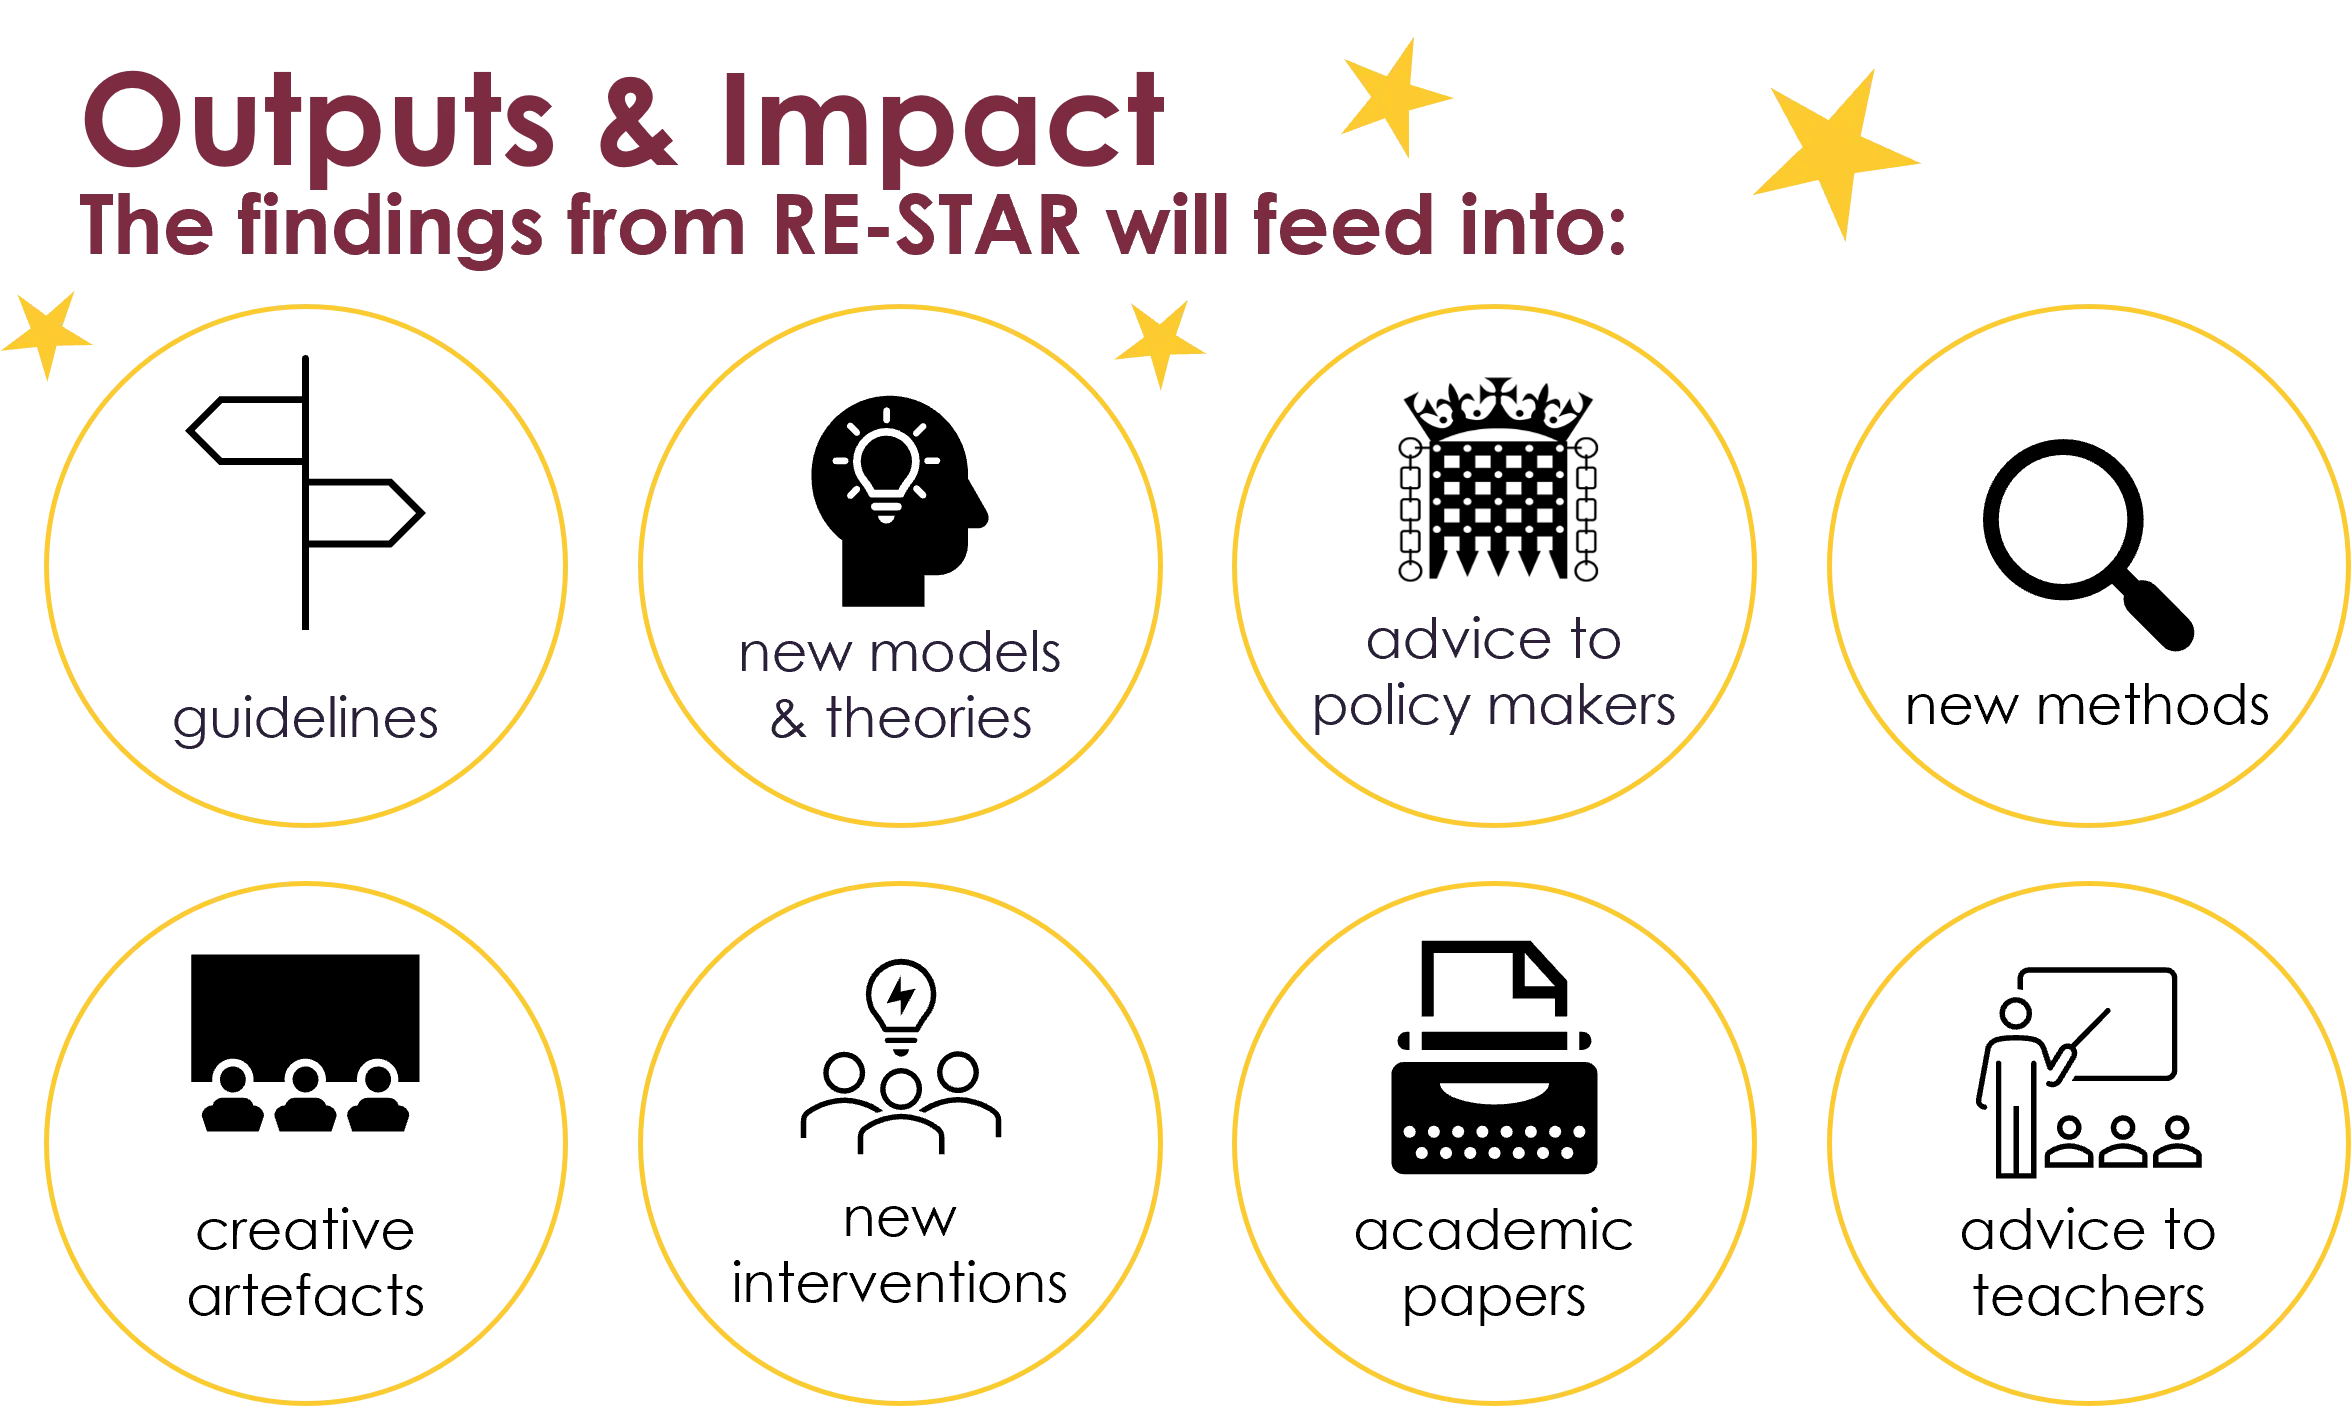 RE-STAR outputs and impact